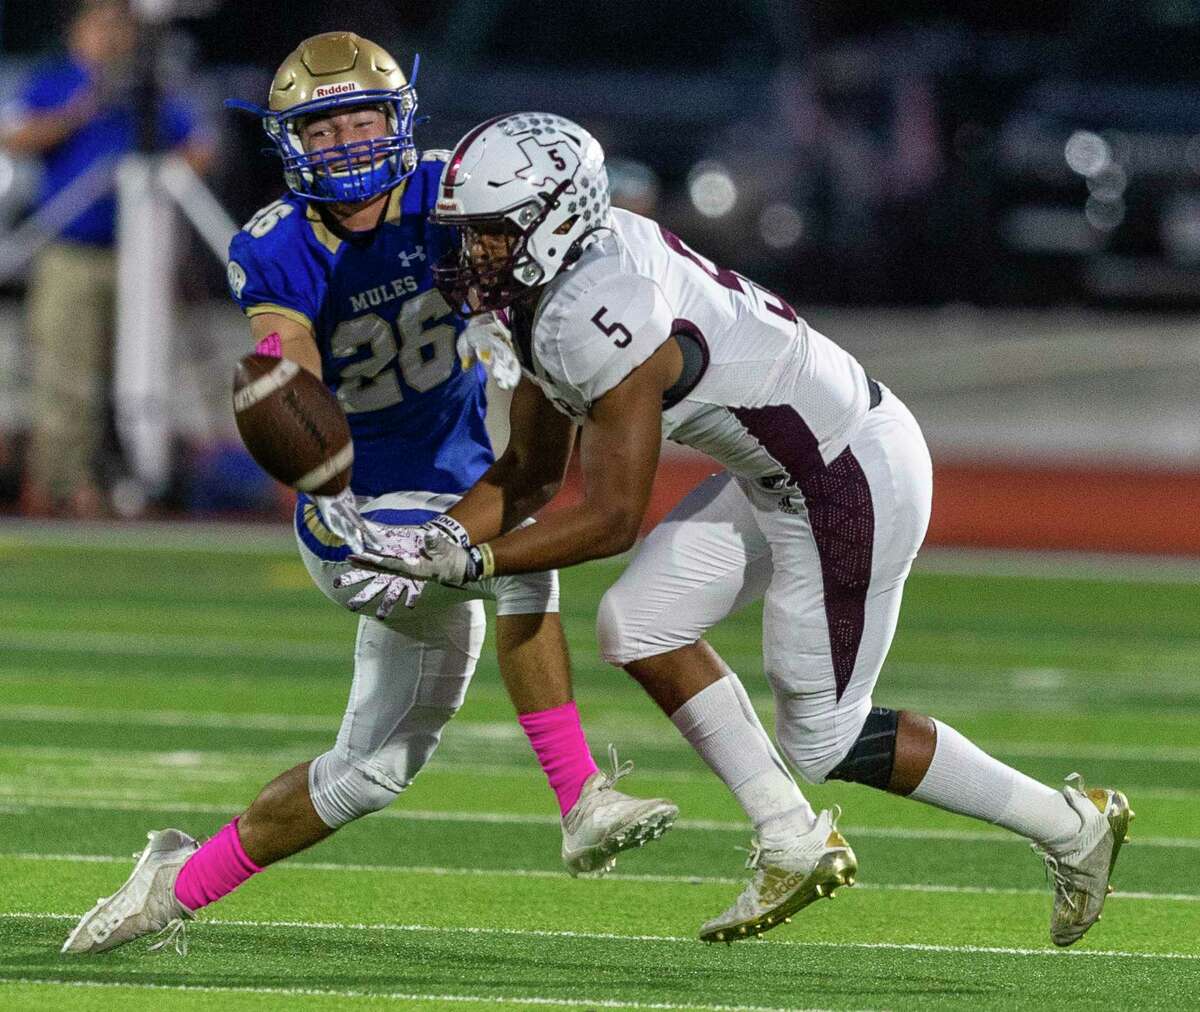 Alamo Heights holds on for 3629 victory over Floresville